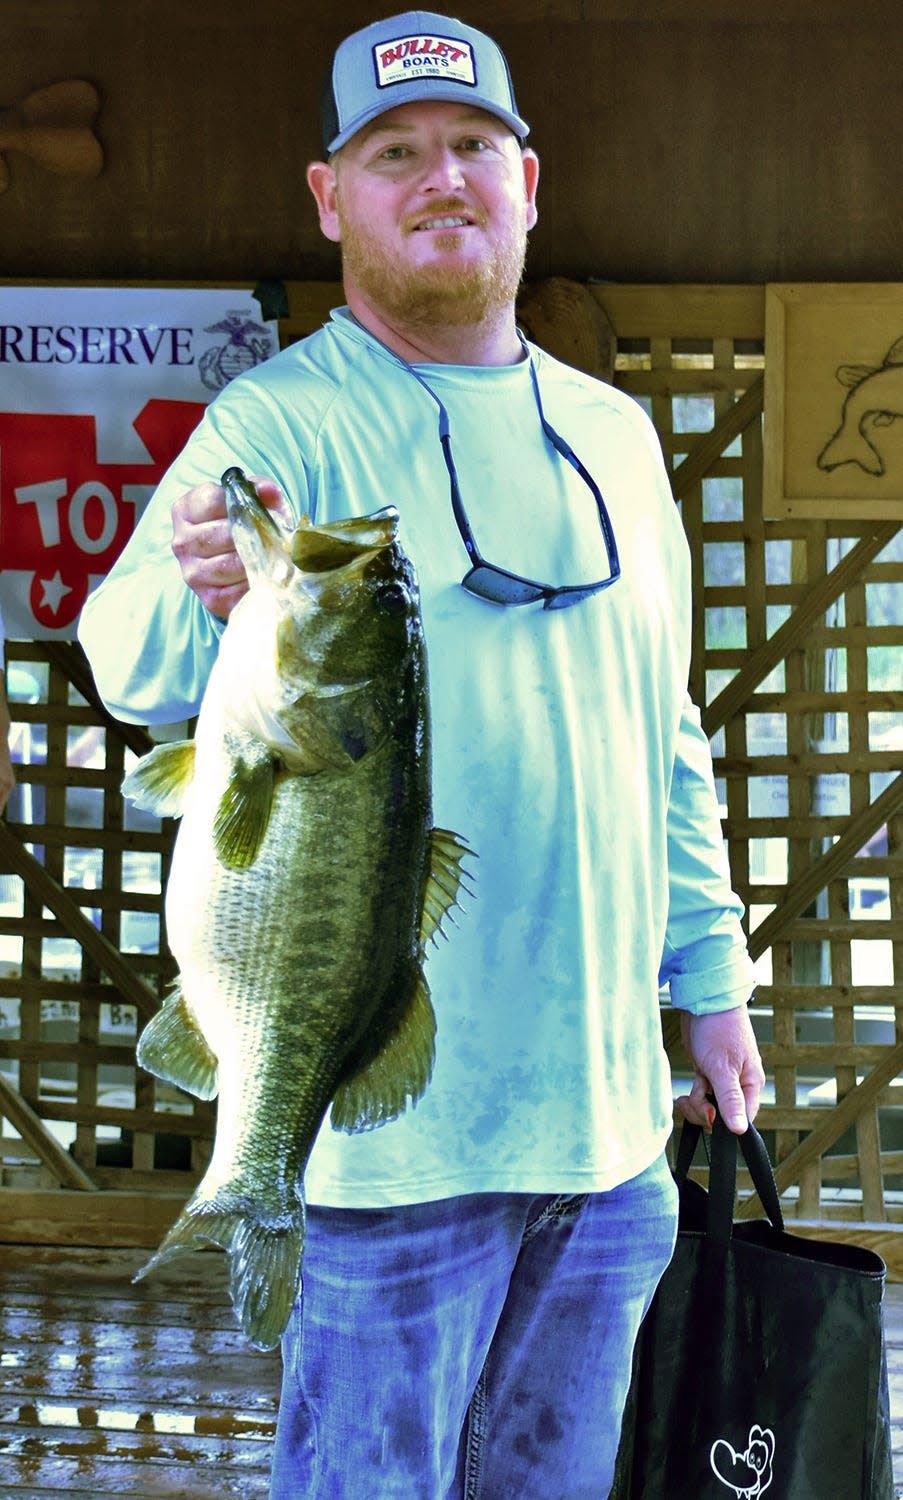 Brian Dutcher won big bass with this 8.24 pounder to help him and his partners Matthew Rittman, Seth Slanker and Jackson Swisher to a total weight of 43.11 pounds to win the Eighth Annual Toys for Tots 4-Man Team Open Tournament Dec. 5. at Lake Kissimmee.